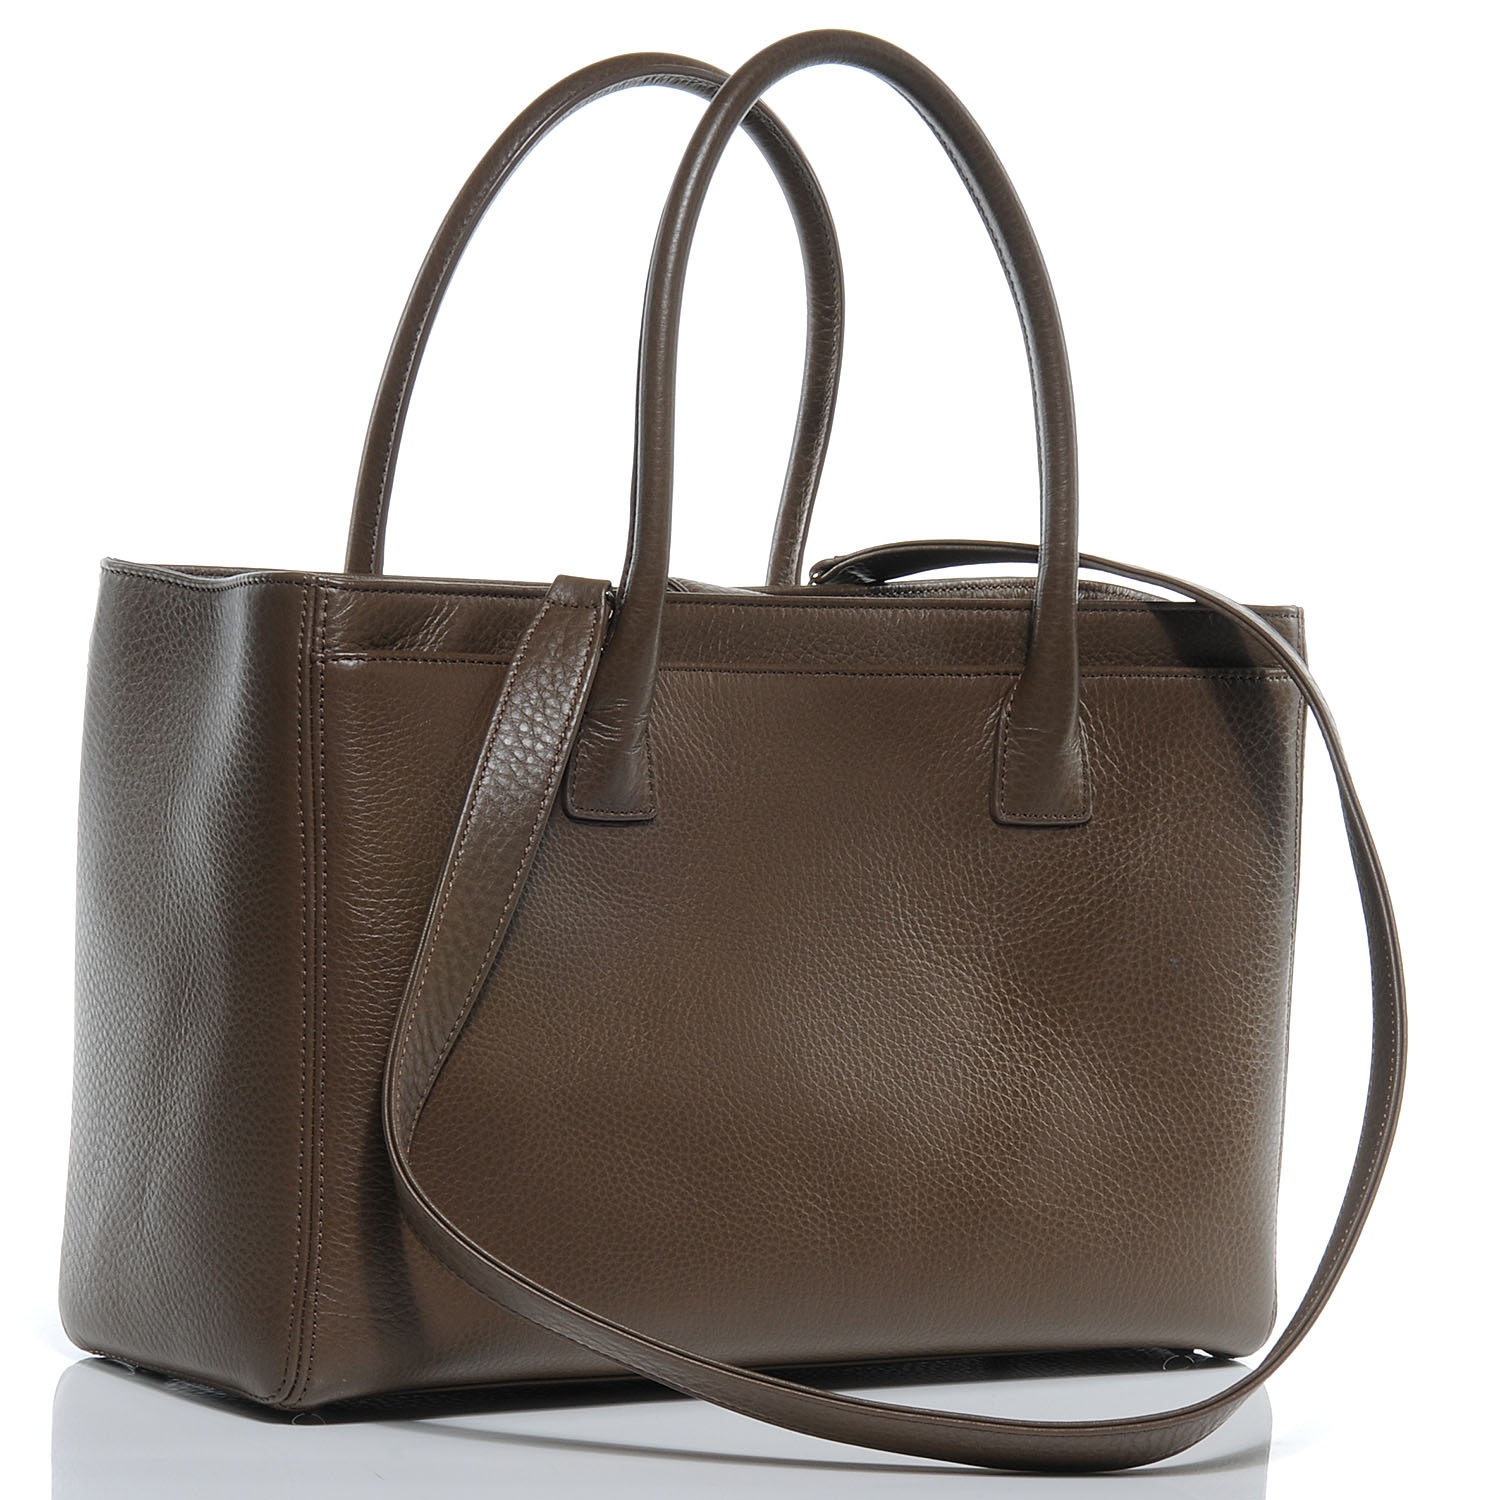 CHANEL Deerskin Cerf Executive Shopper Tote Brown 52708 | FASHIONPHILE